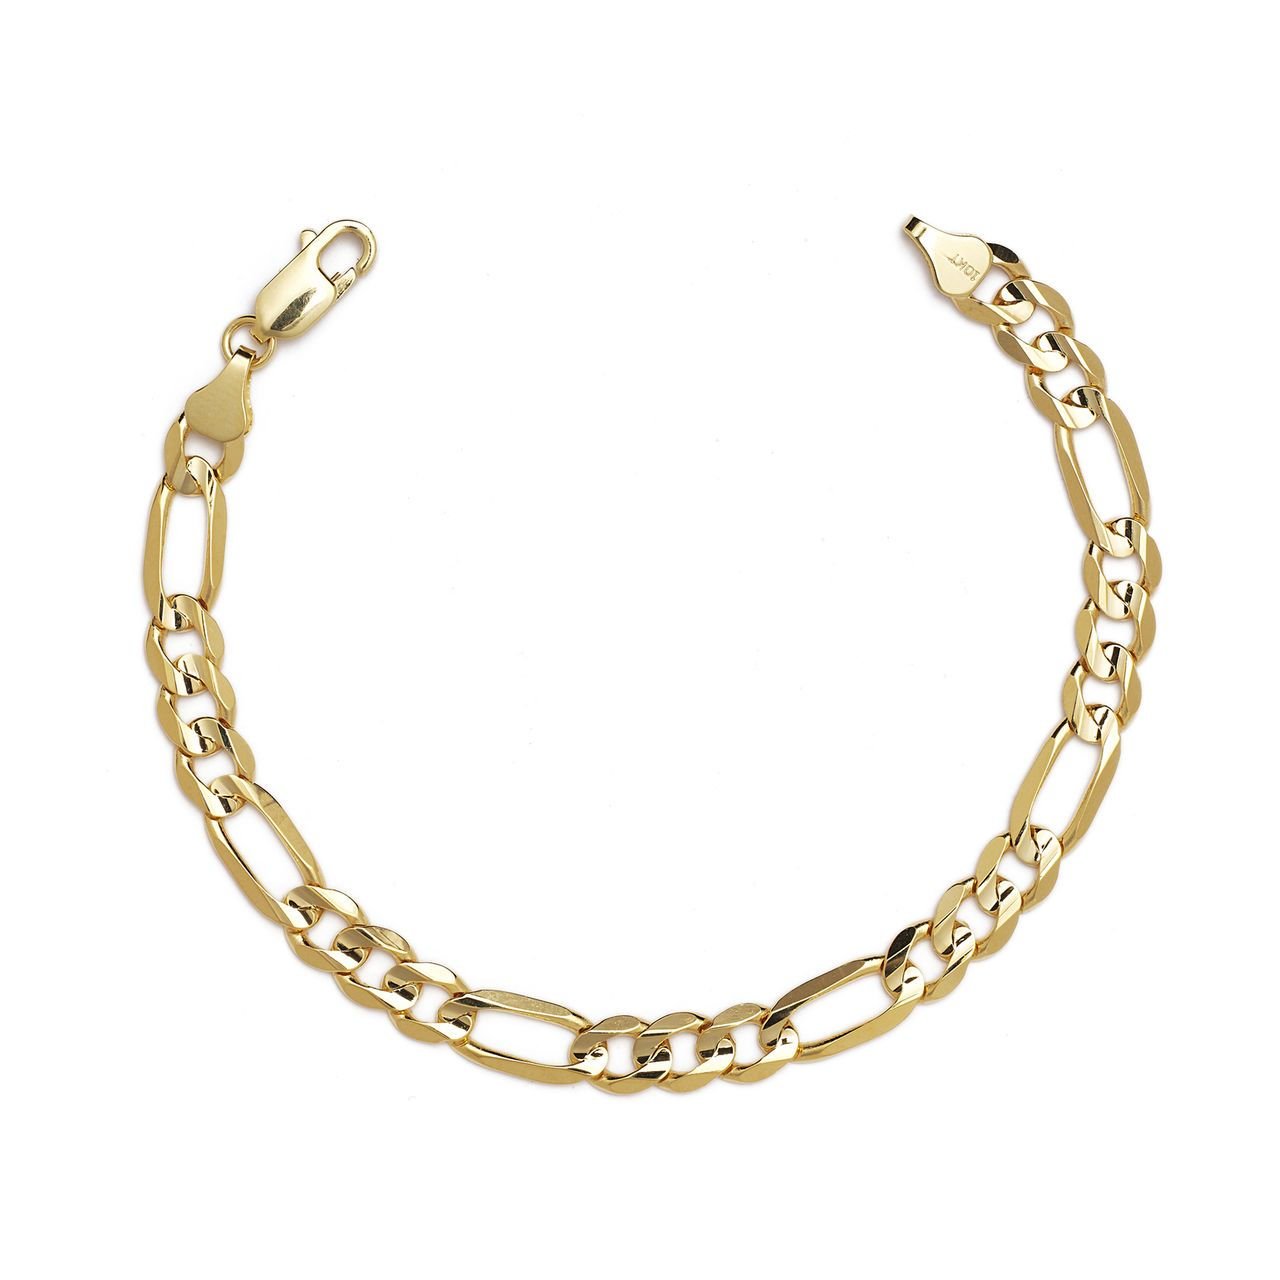 10k Yellow Gold Figaro Chain Bracelet with Concave Look, 0.31 Inch (8mm)